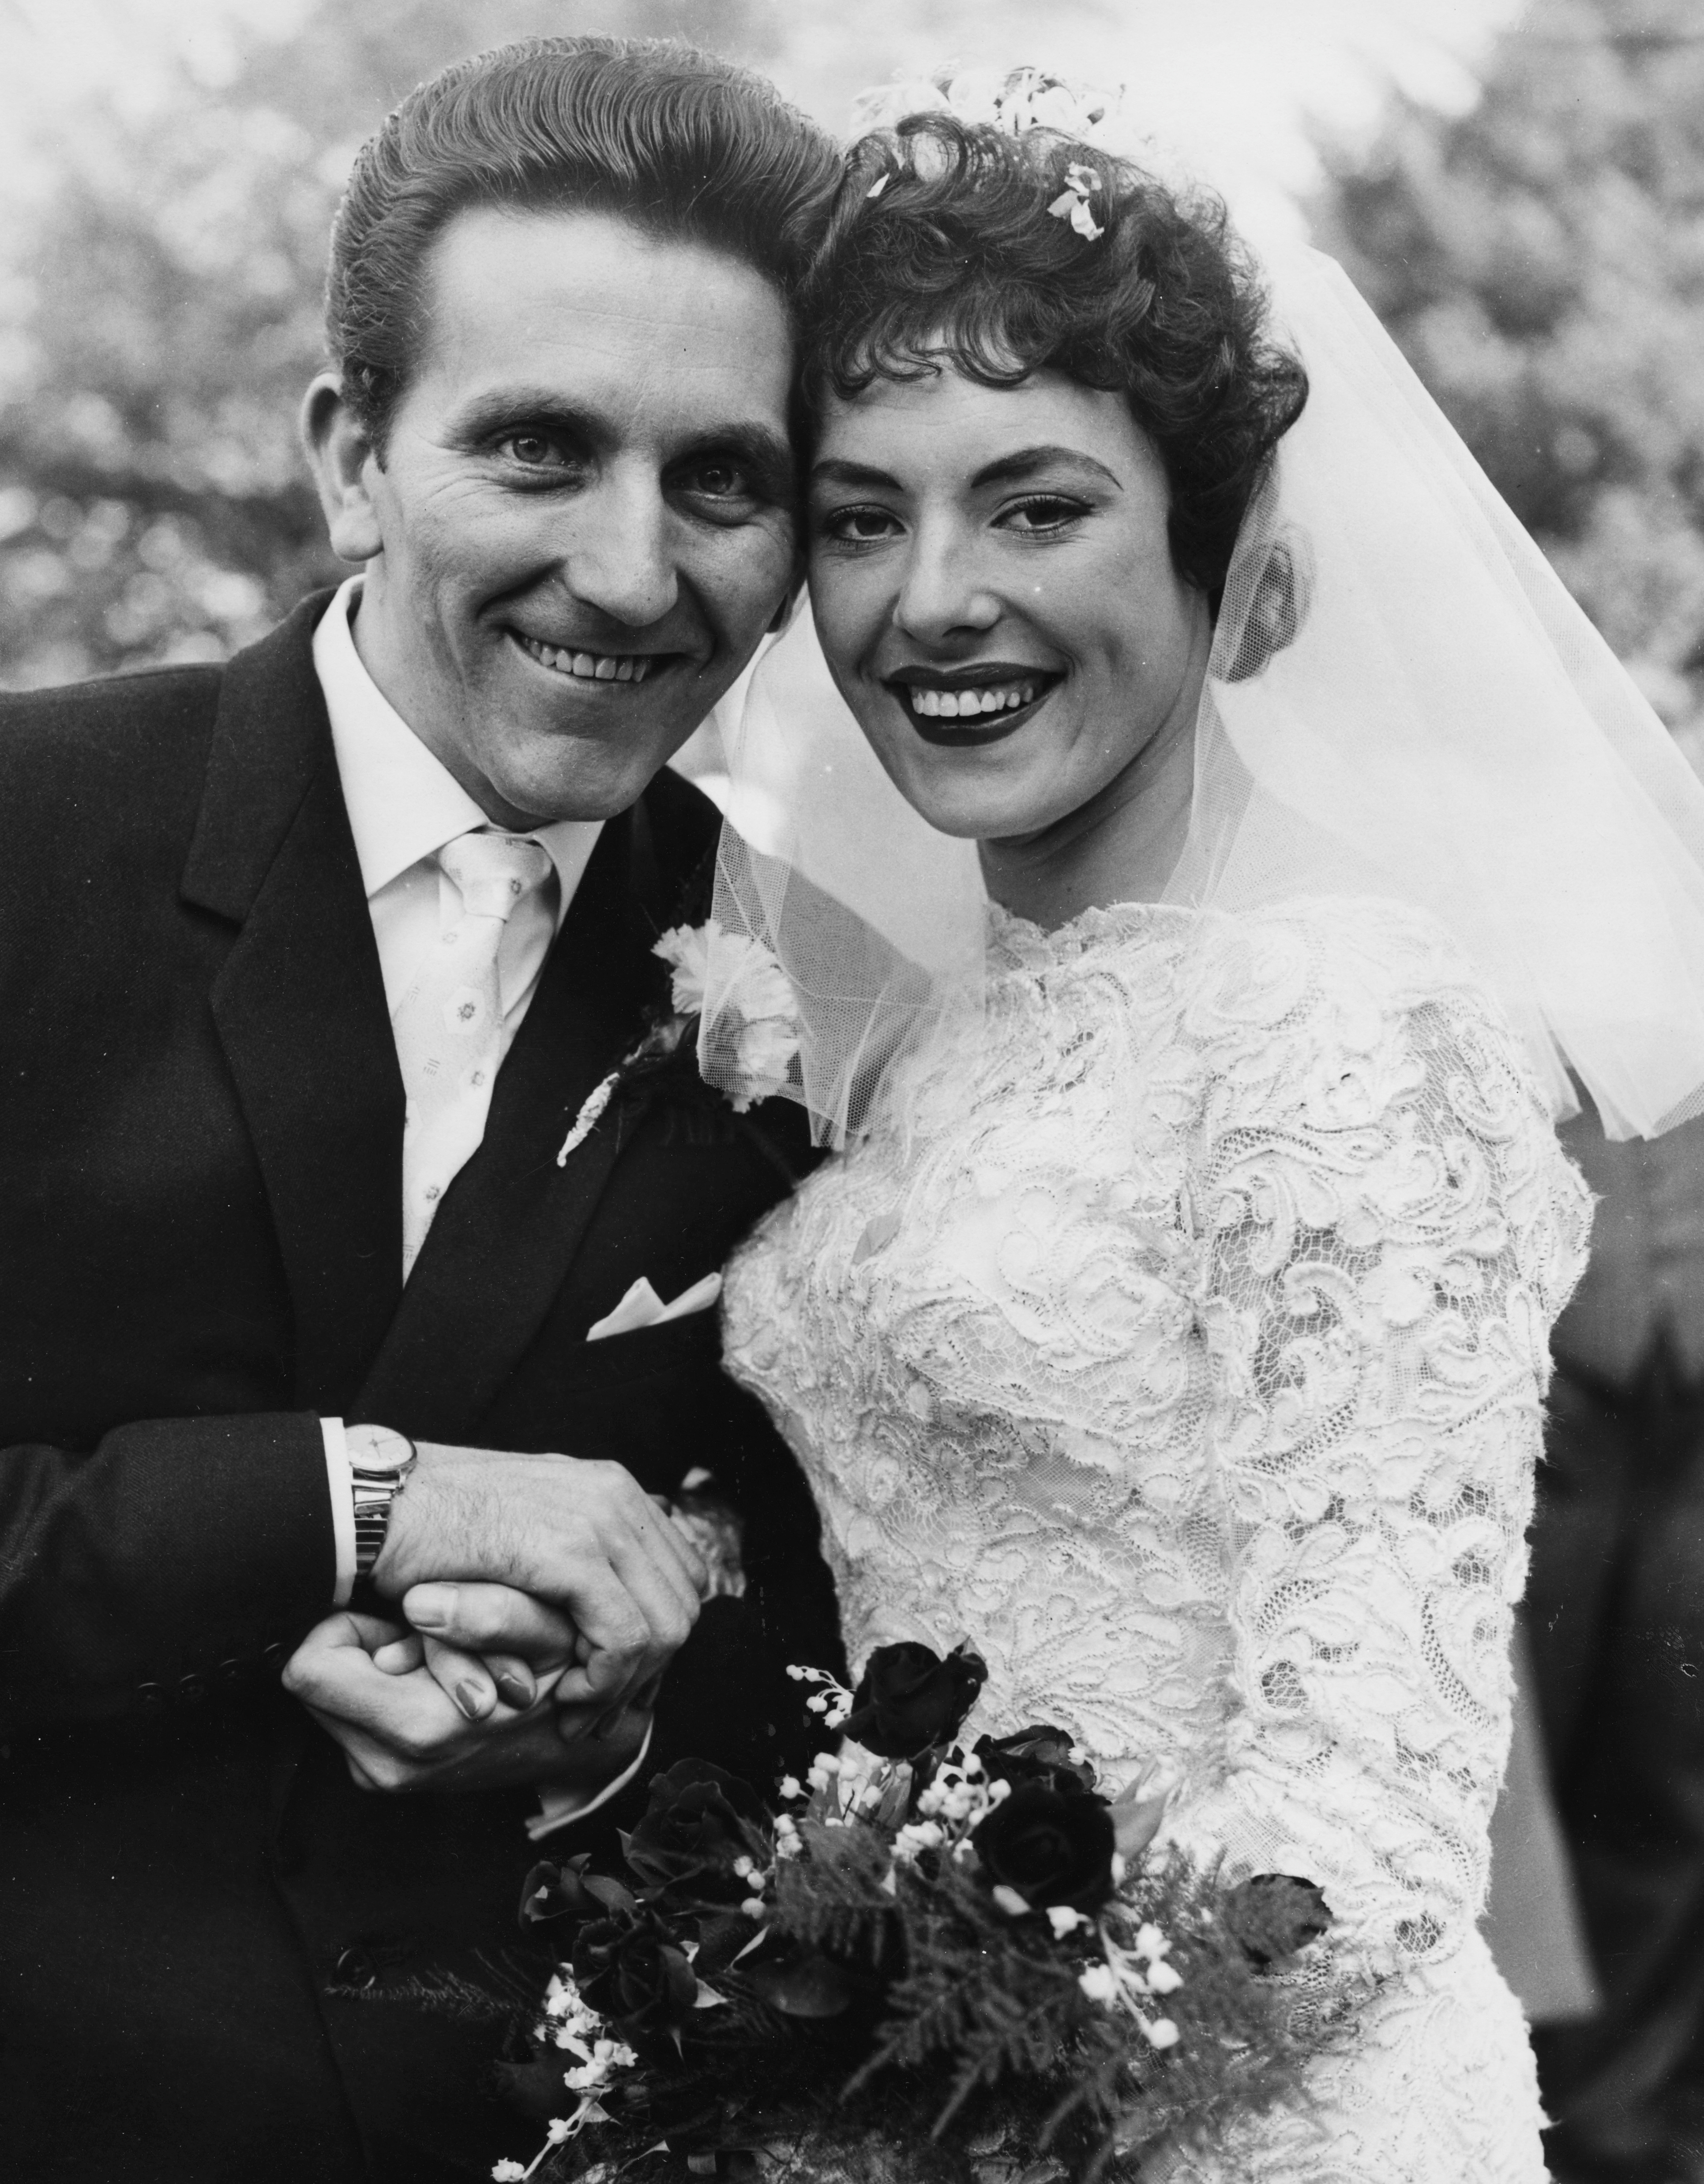 Singer and comedienne Anne Hart and her groom John Padley on their wedding day, at Holy Trinity Church, Wallington, Surrey, October 15th 1957. (Getty)